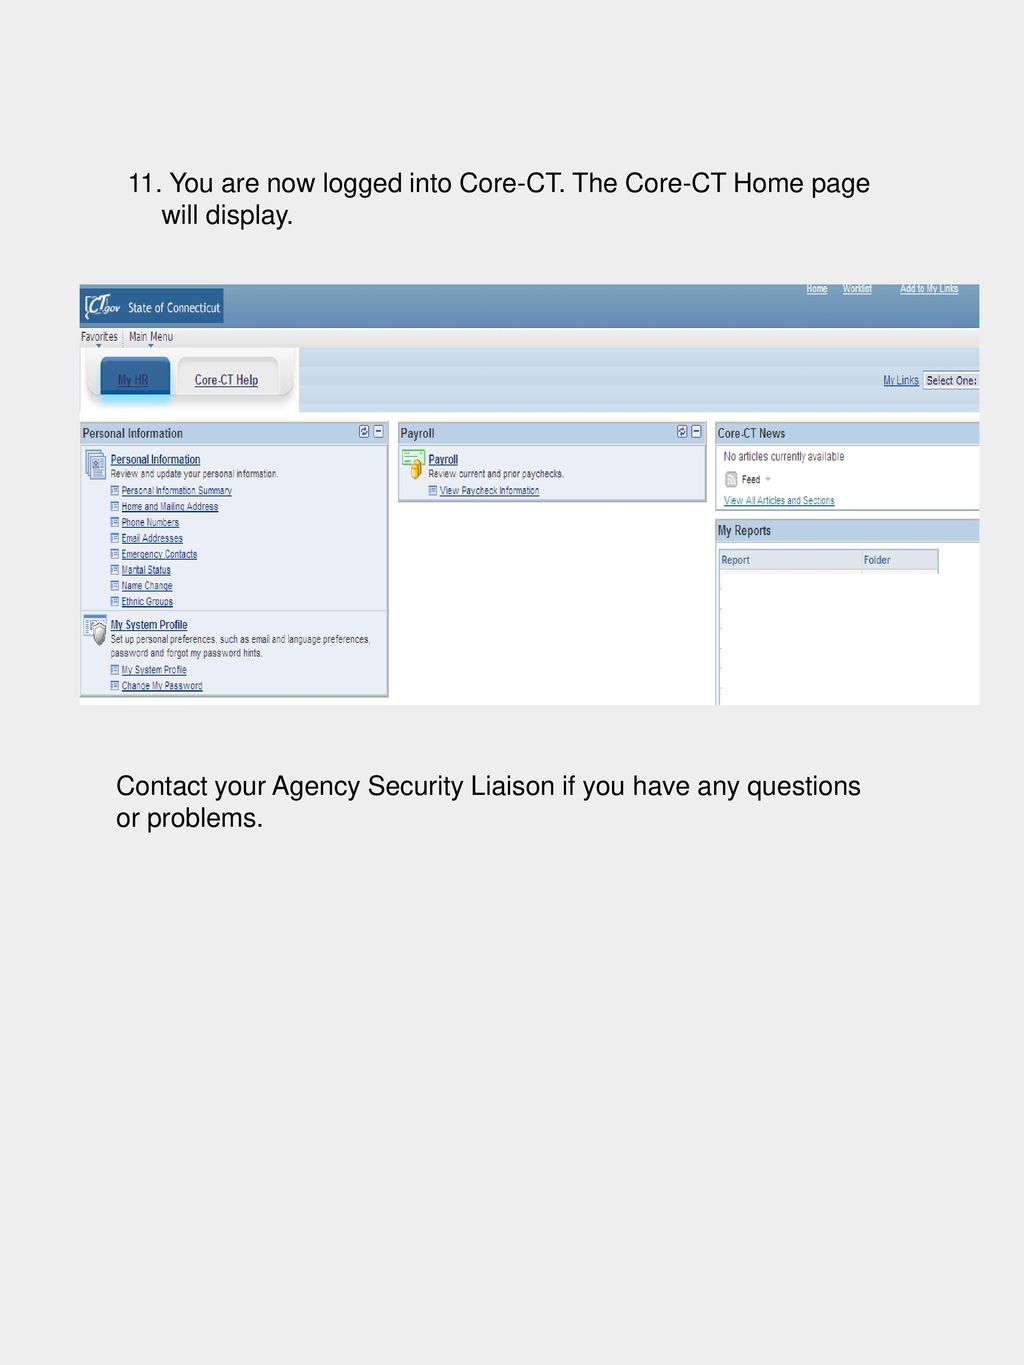 11. You are now logged into Core-CT. The Core-CT Home page will display.